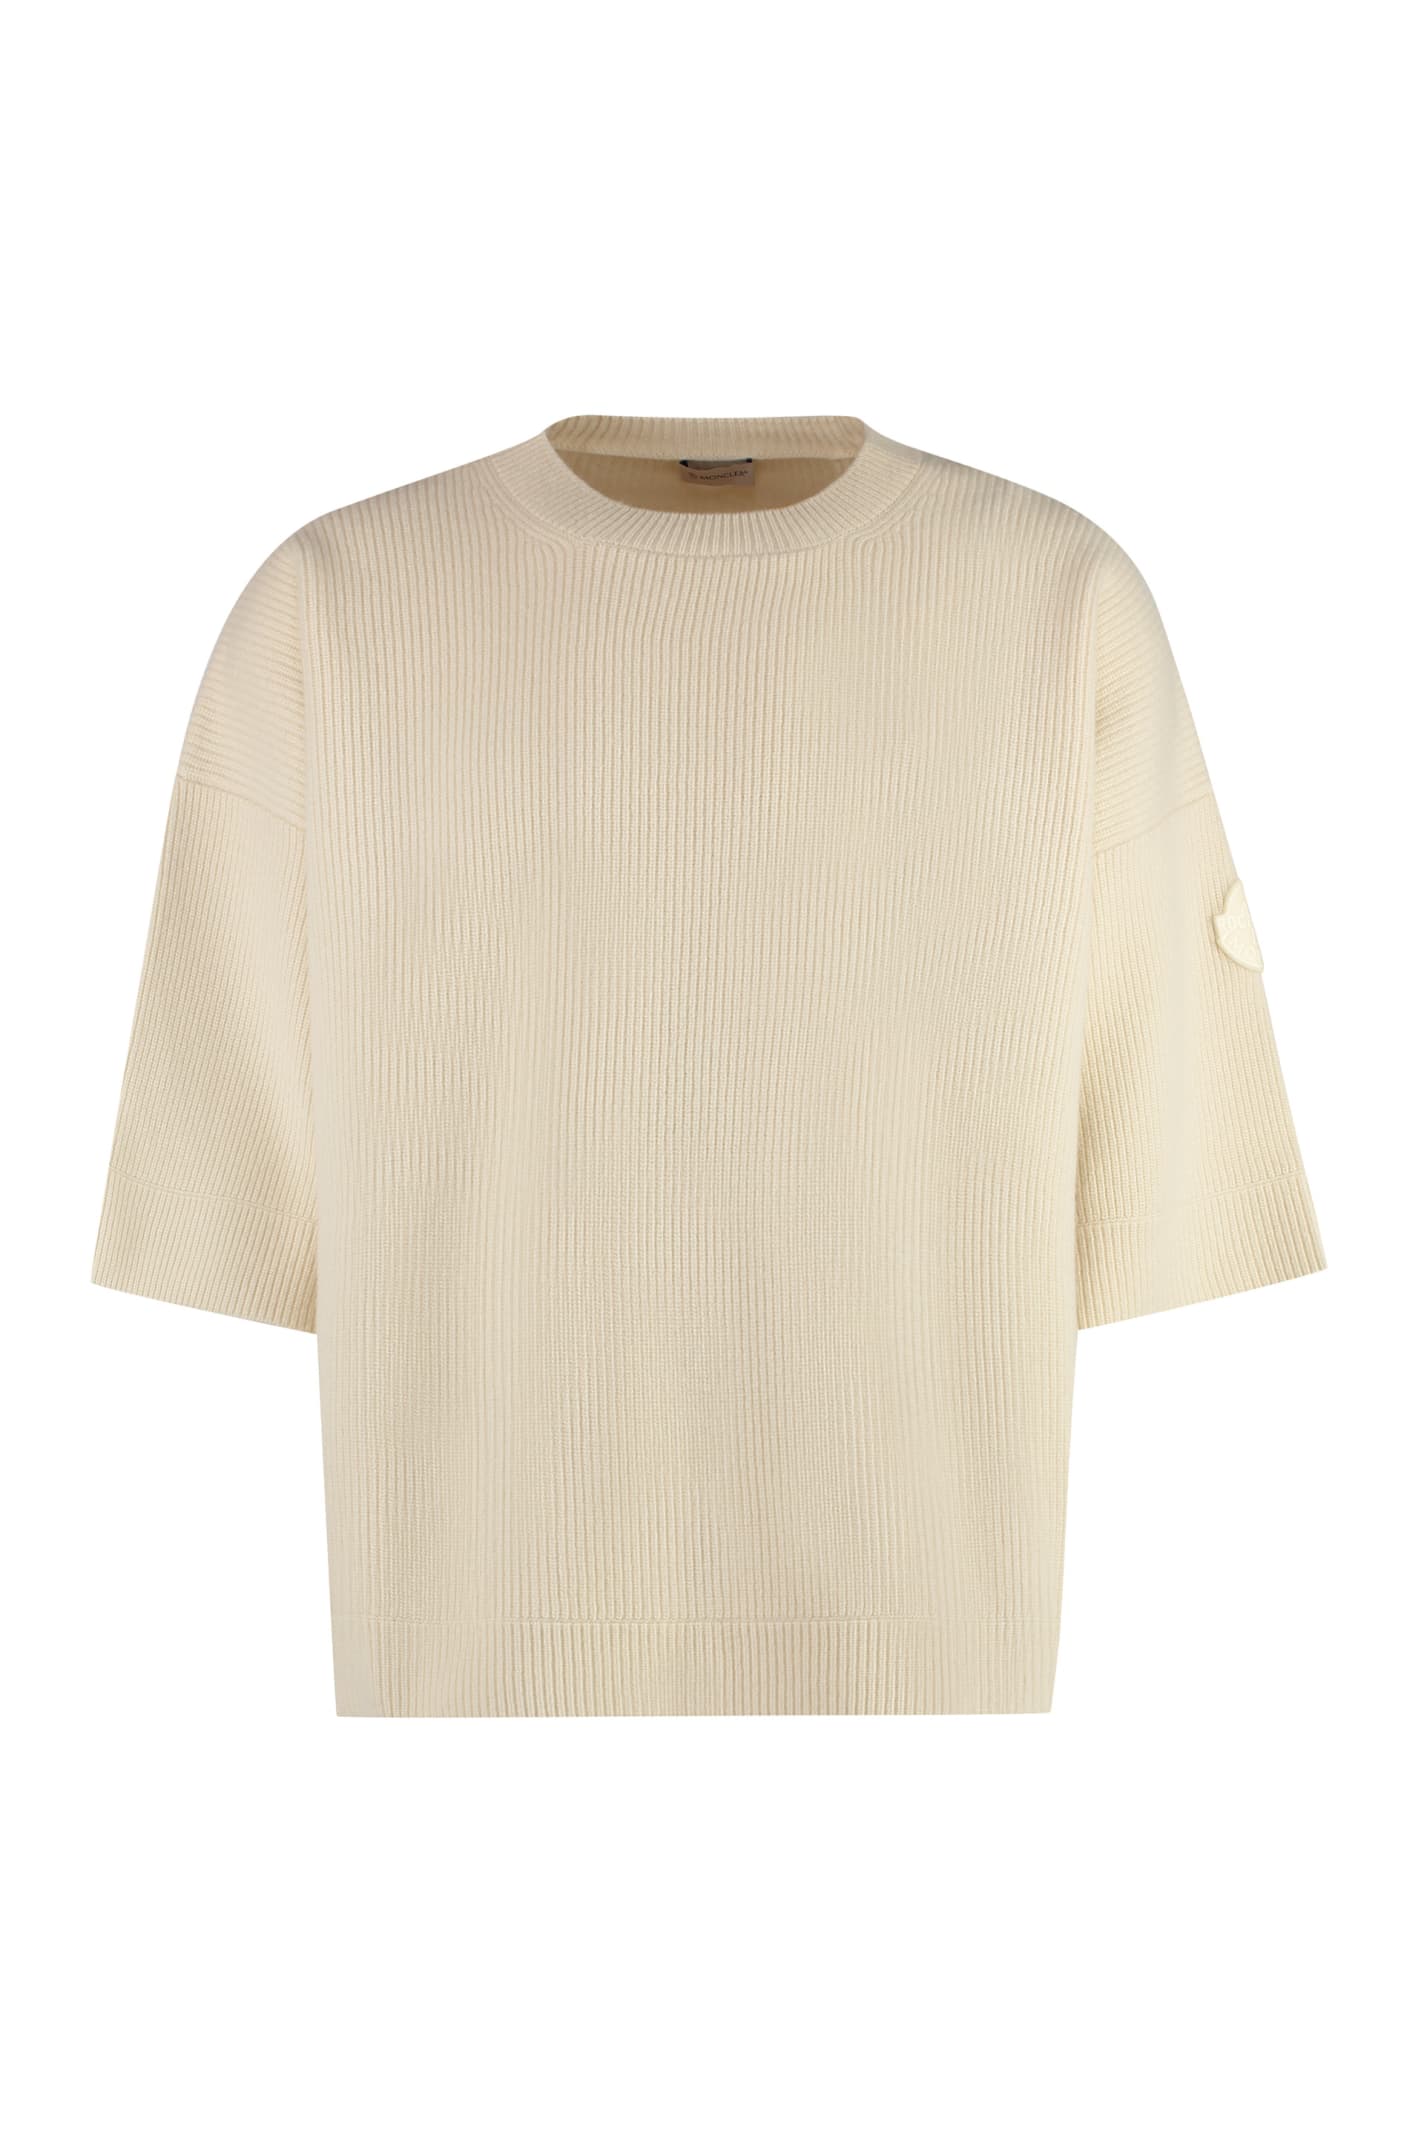 Moncler Genius Moncler X Roc Nation Designed By Jay-z - Virgin Wool Crew-neck Sweater In Neutrals